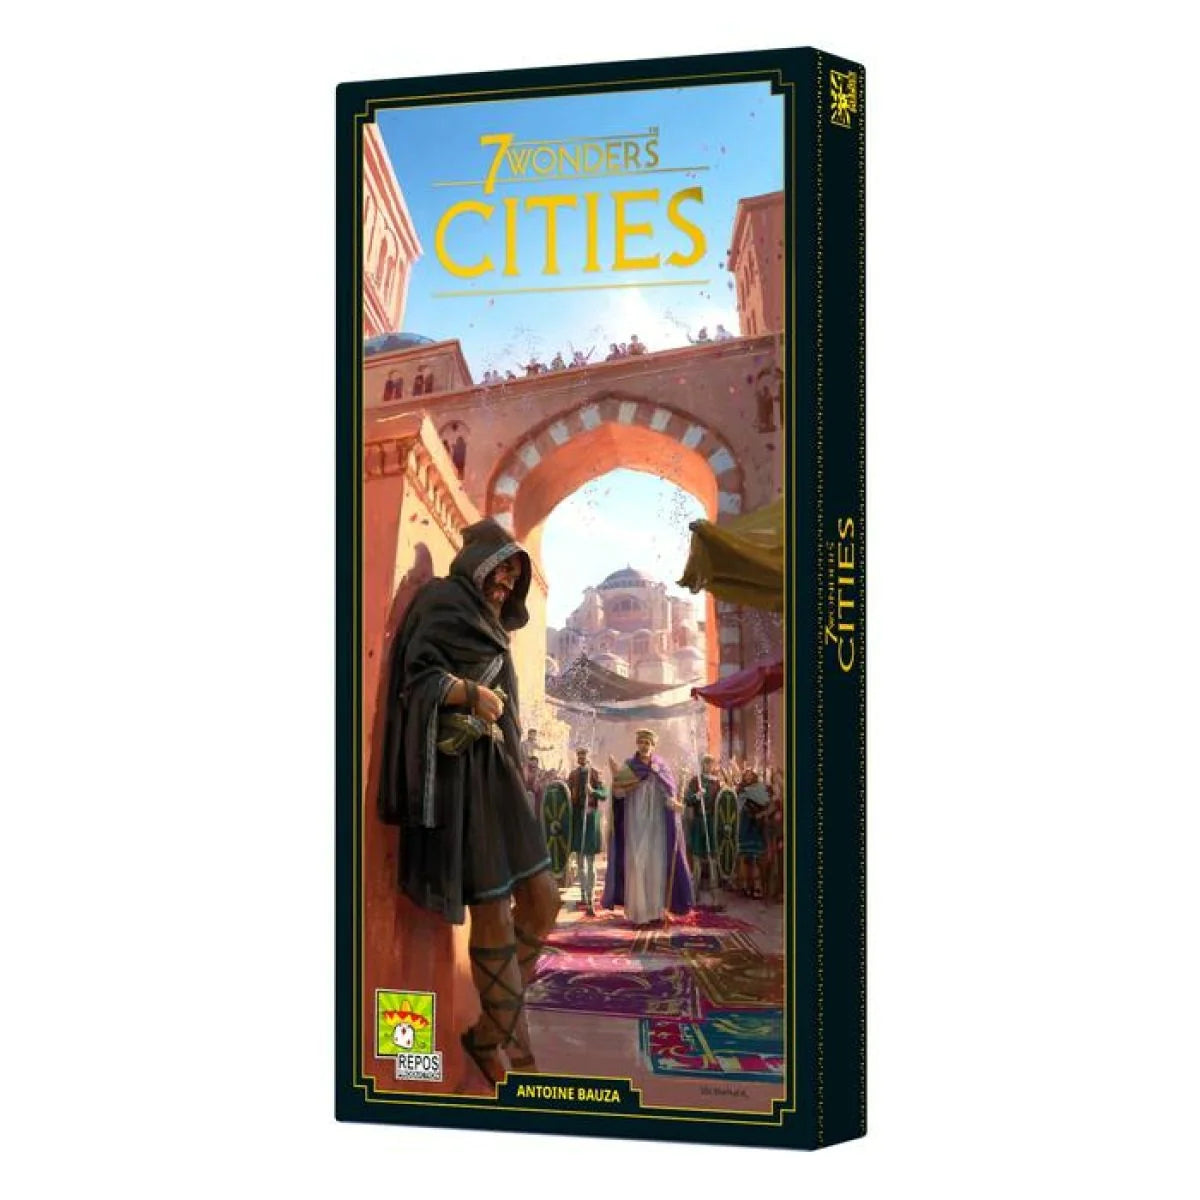 7 Wonders New Edition - Cities Expansion